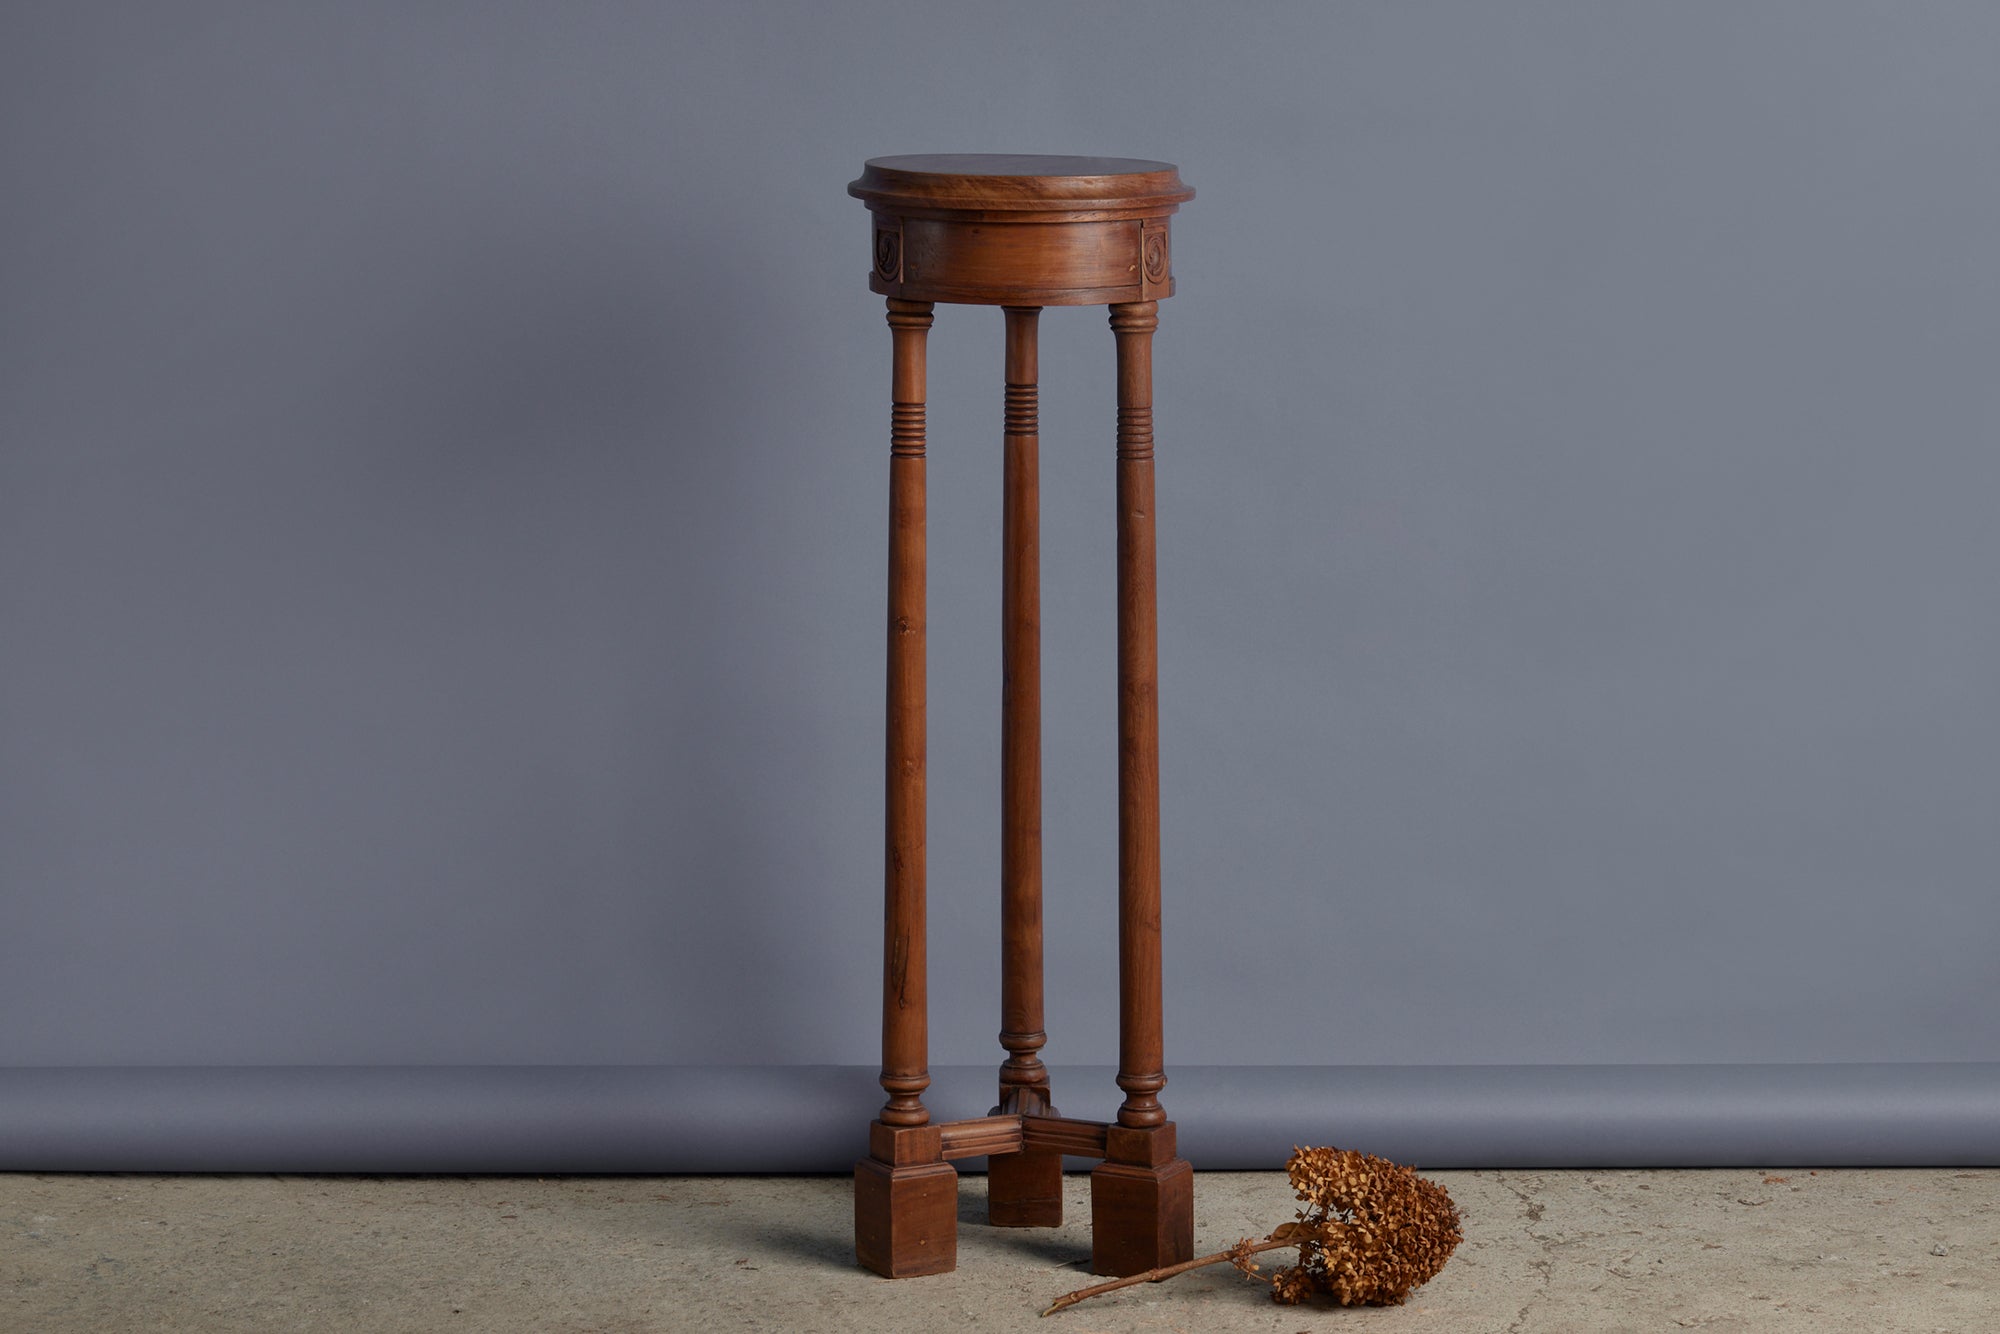 Deco Plant Stand Period Dutch Colonial Teak with Carved Features at the Top of the Column